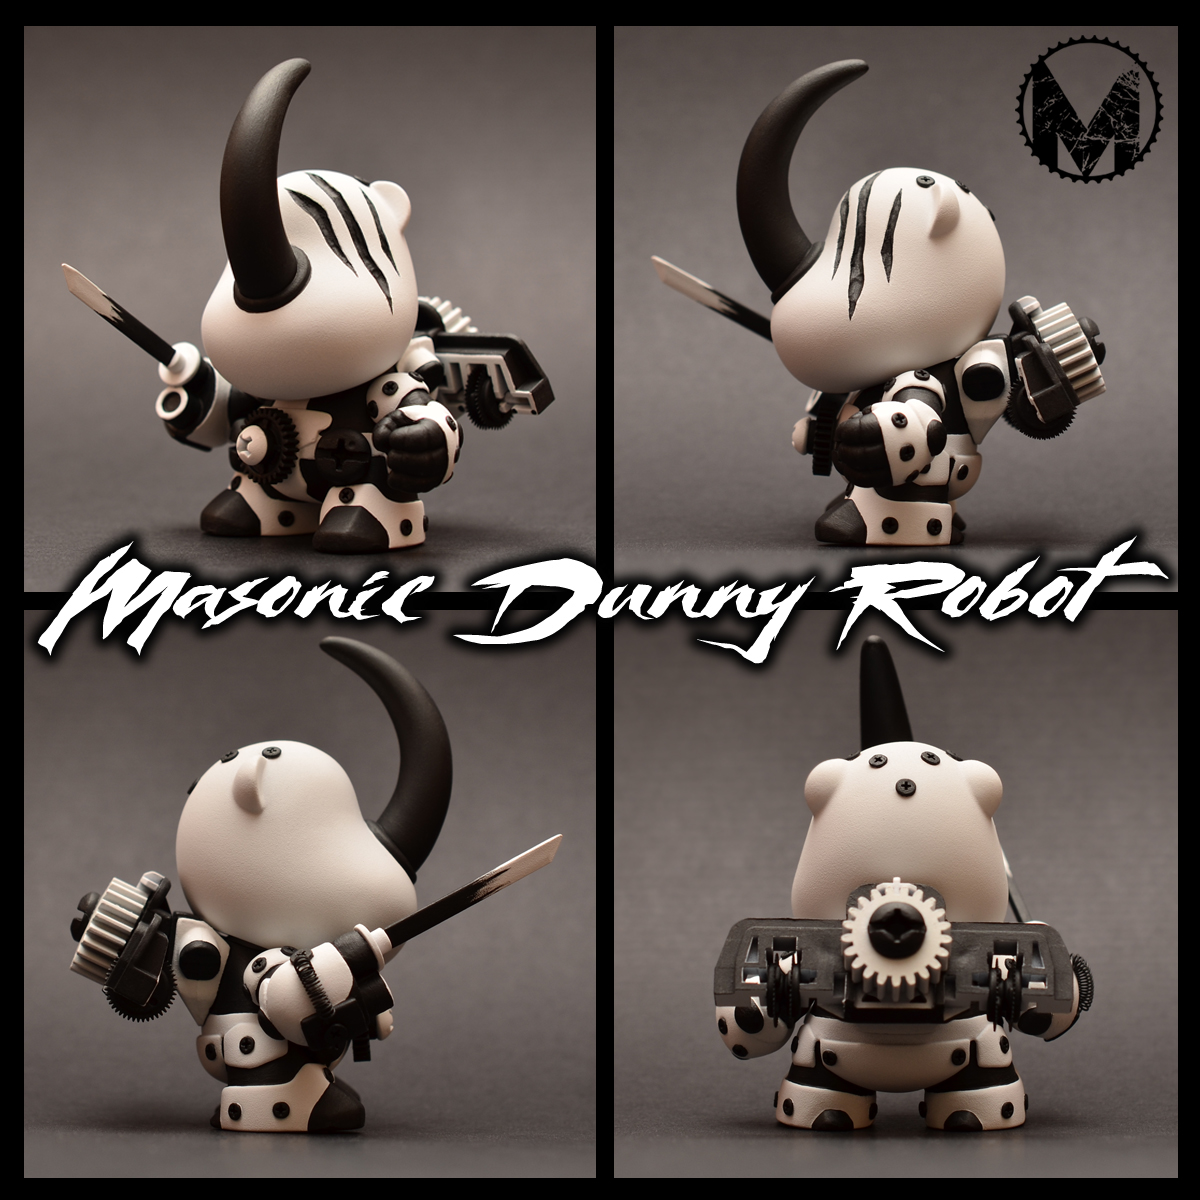 MindoftheMasons   Kidrobot Dunny robot Masonic Dunny Robot mdr vinyl toy designer toy toy abstract Hand Painted